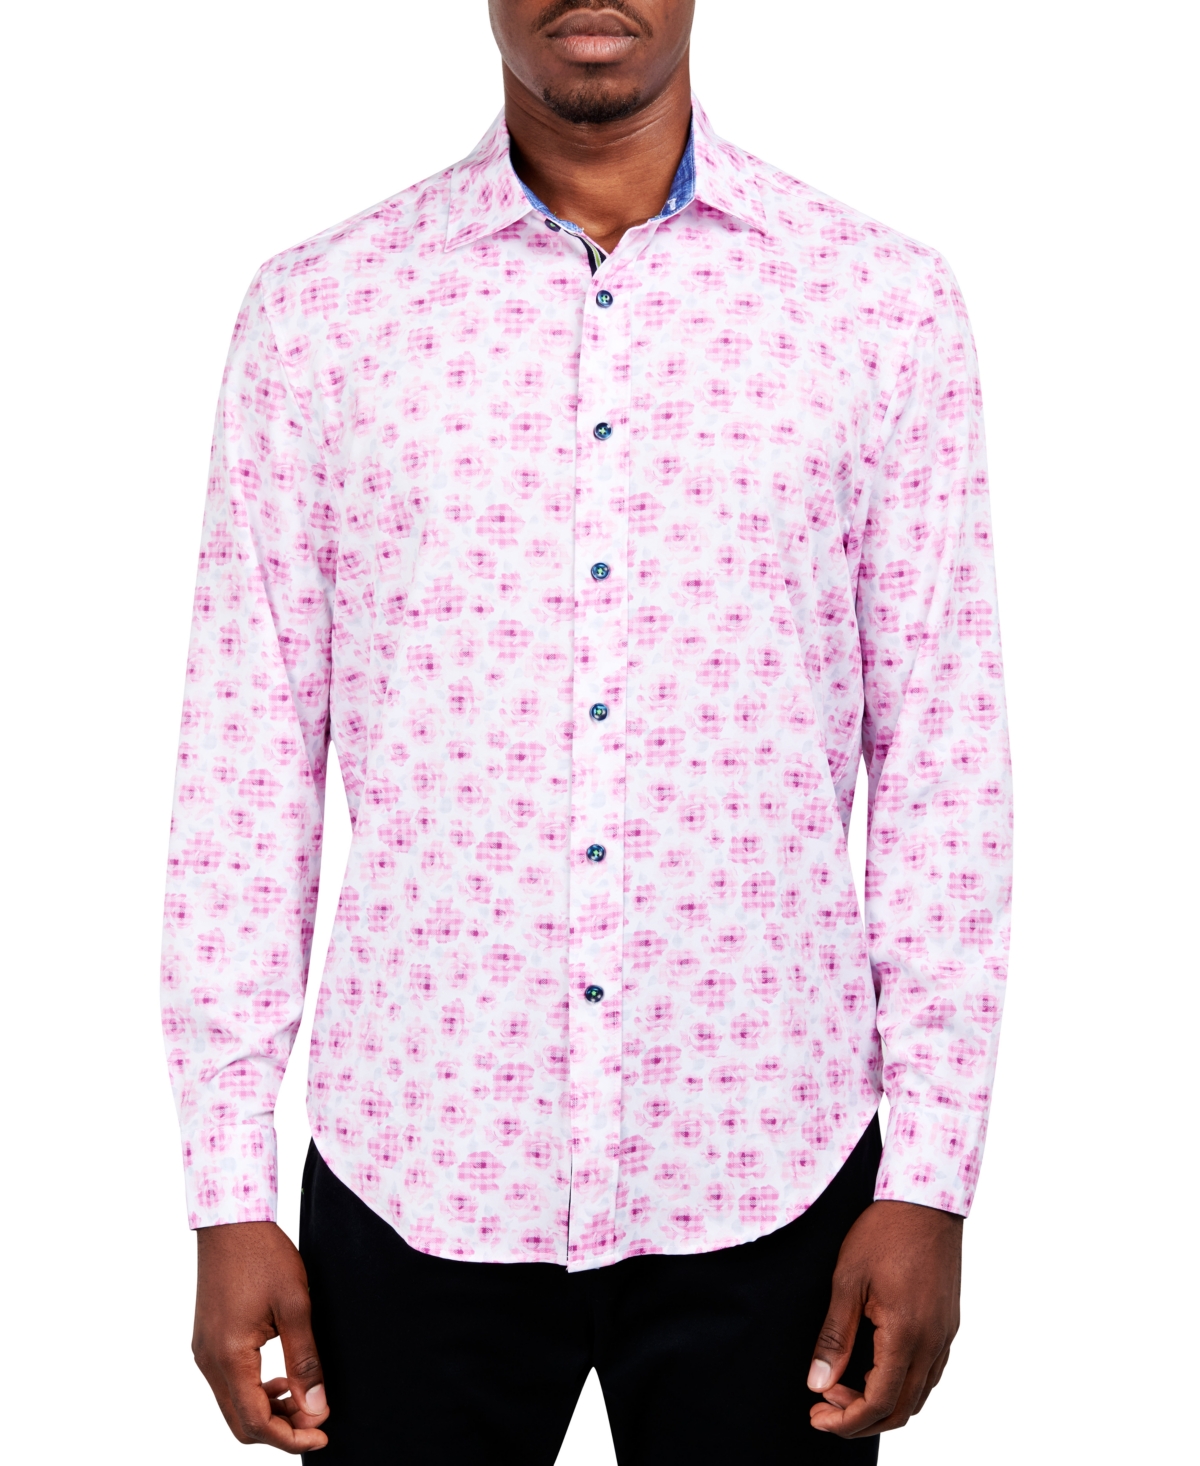 Men's Slim-Fit Performance Stretch Floral Long-Sleeve Button-Down Shirt - Pink